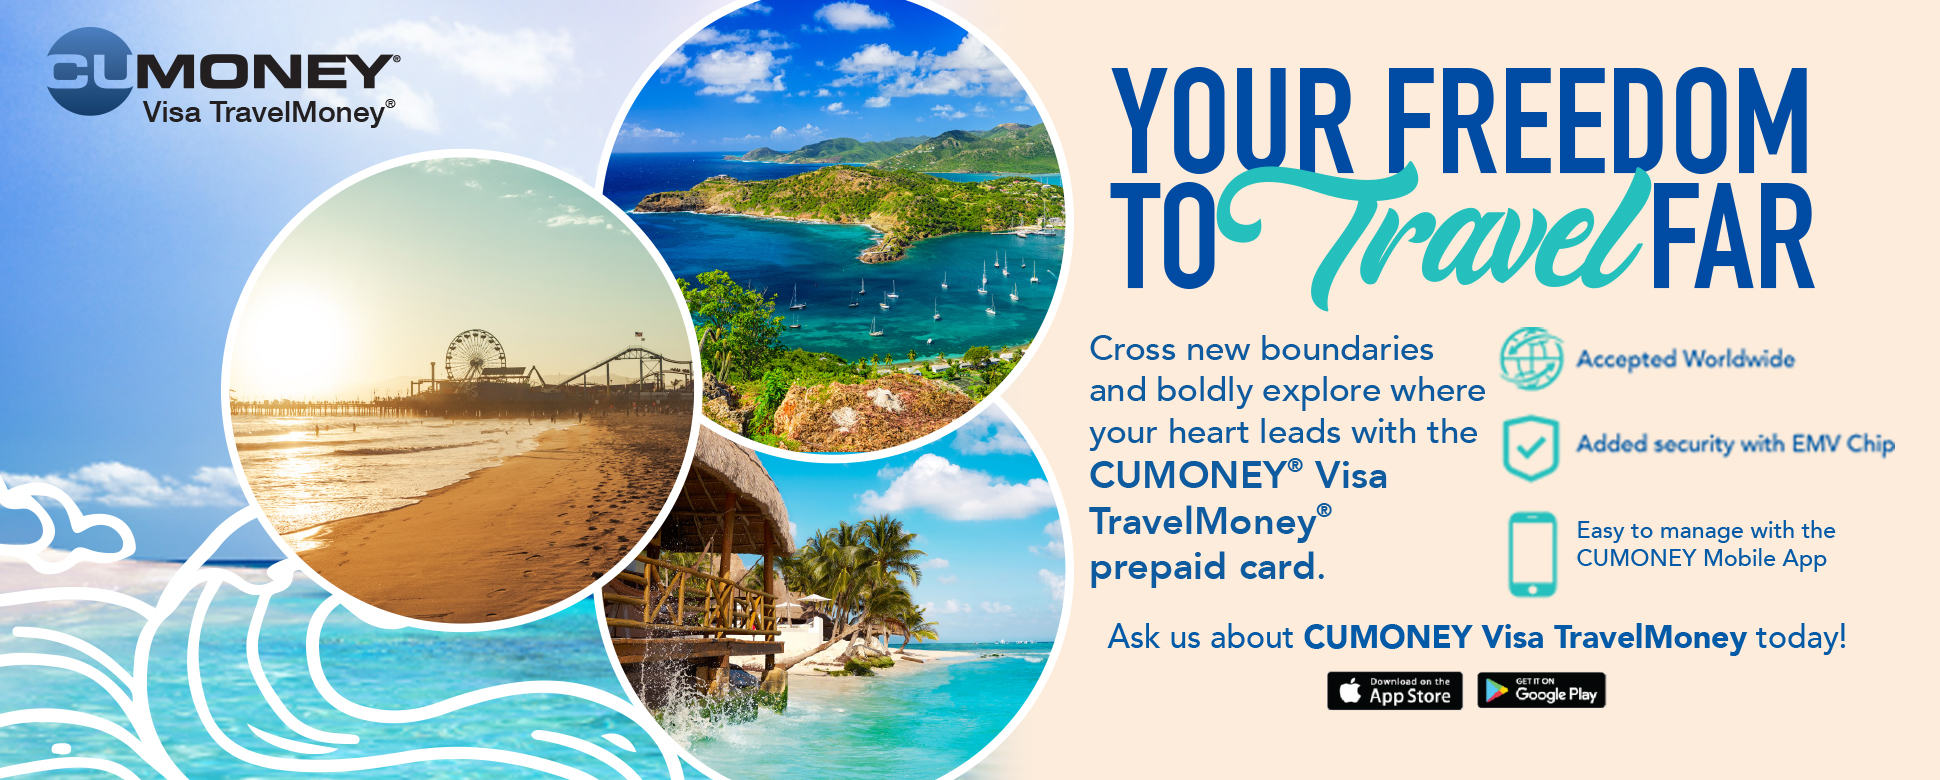 Your freedom to travel far - Ask us about the CUMoney Travel Card.